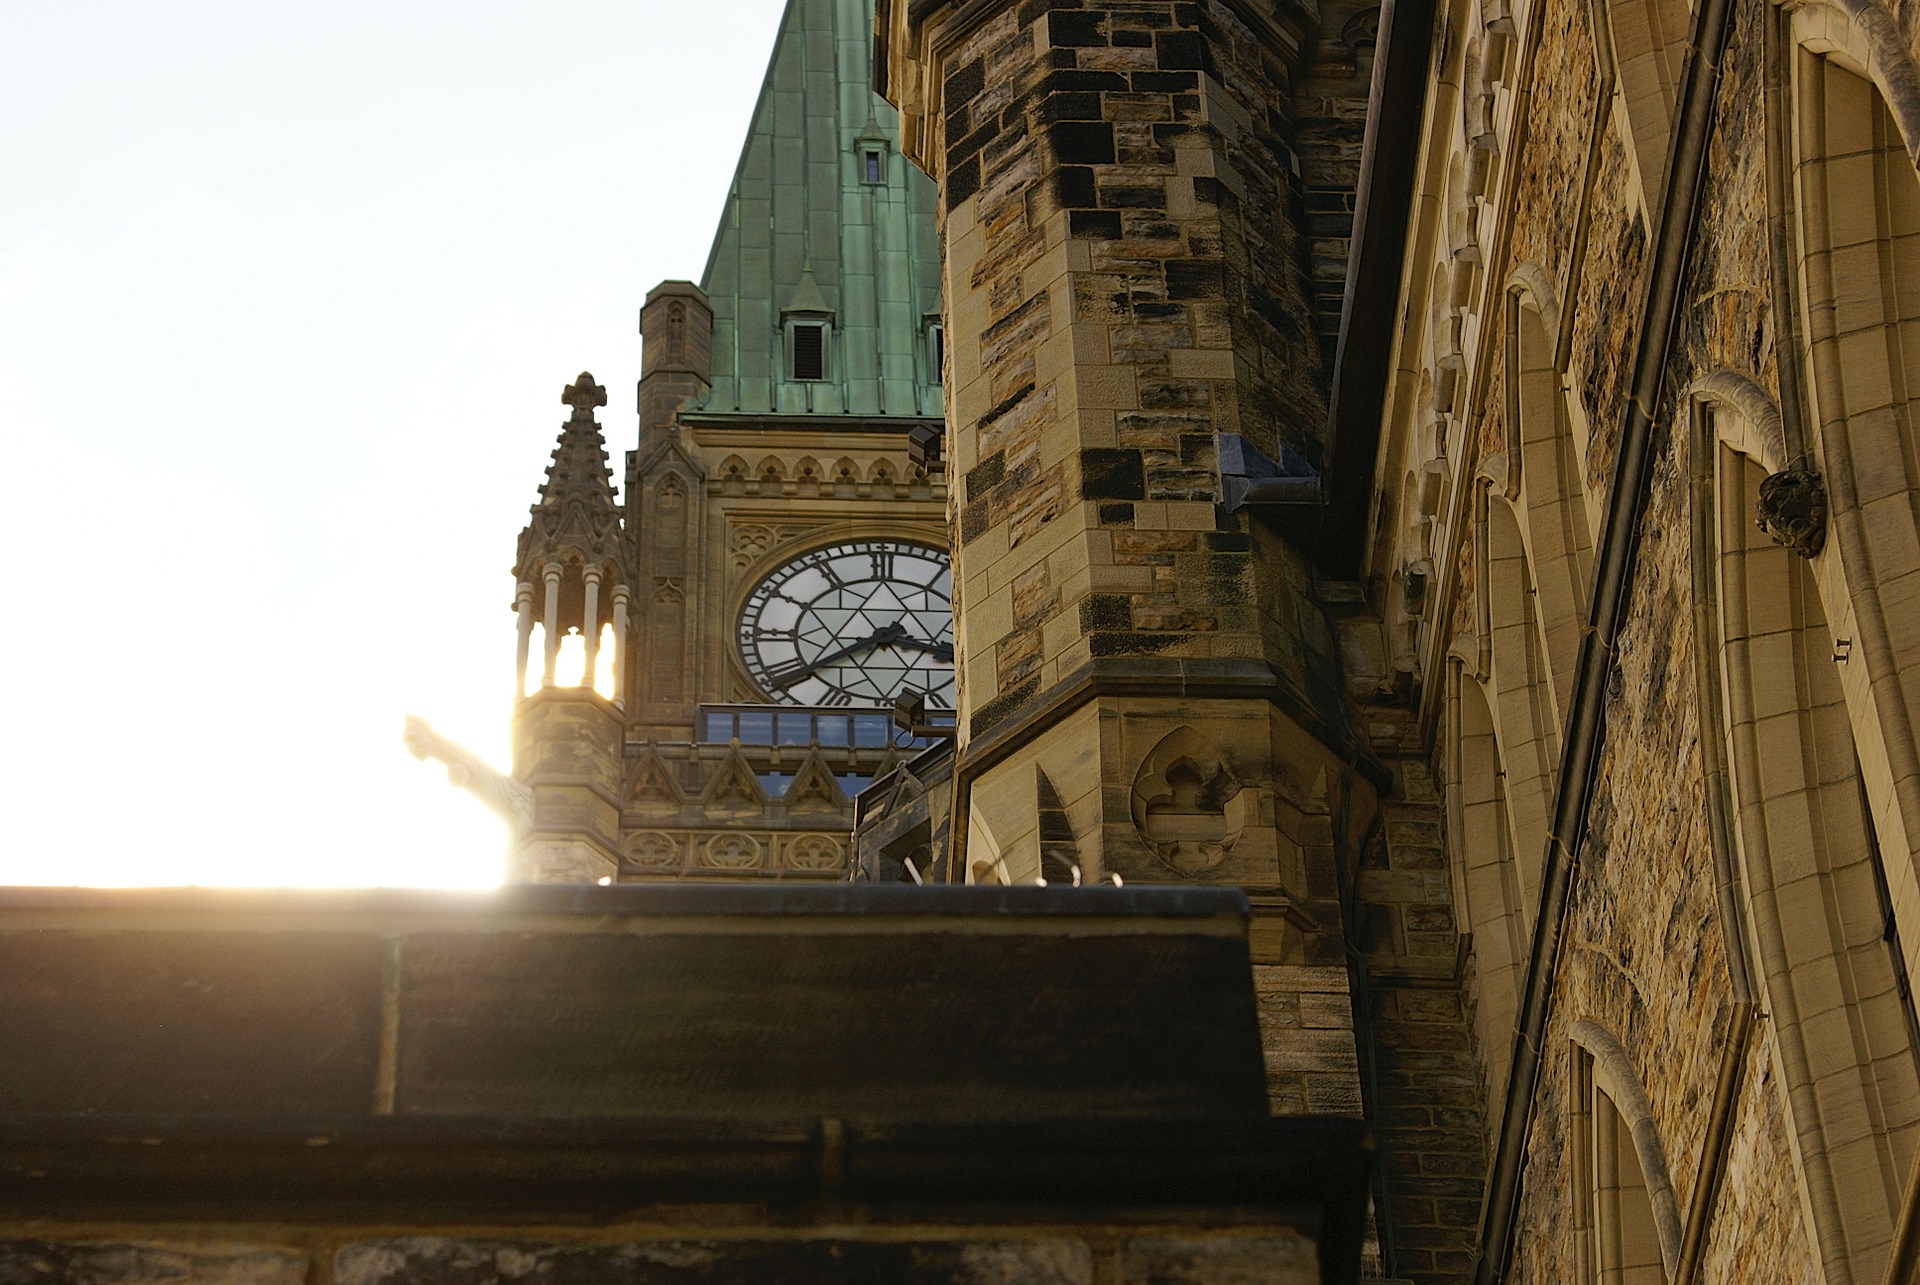 Photograph of the Peace Tower at the Canadian parliament buildings taken from the ground so that the clock peeks out from behind another building.